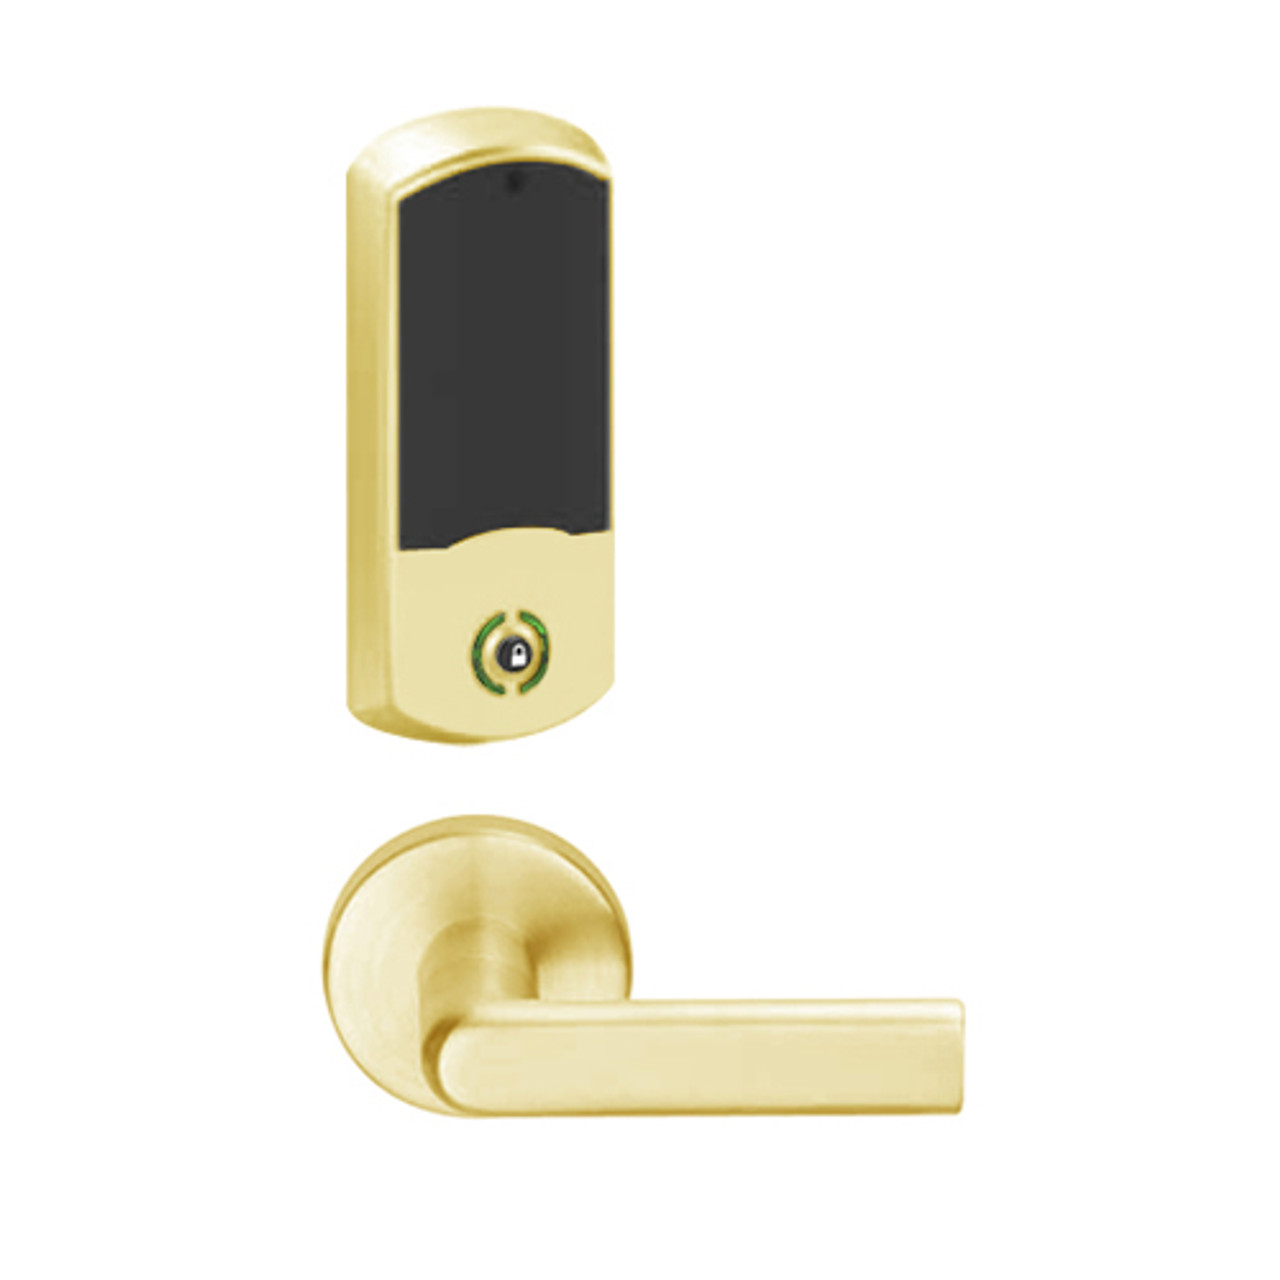 LEMB-GRW-P-01-605-00A Schlage Privacy/Office Wireless Greenwich Mortise Lock with Push Button & LED Indicator and 01 Lever in Bright Brass